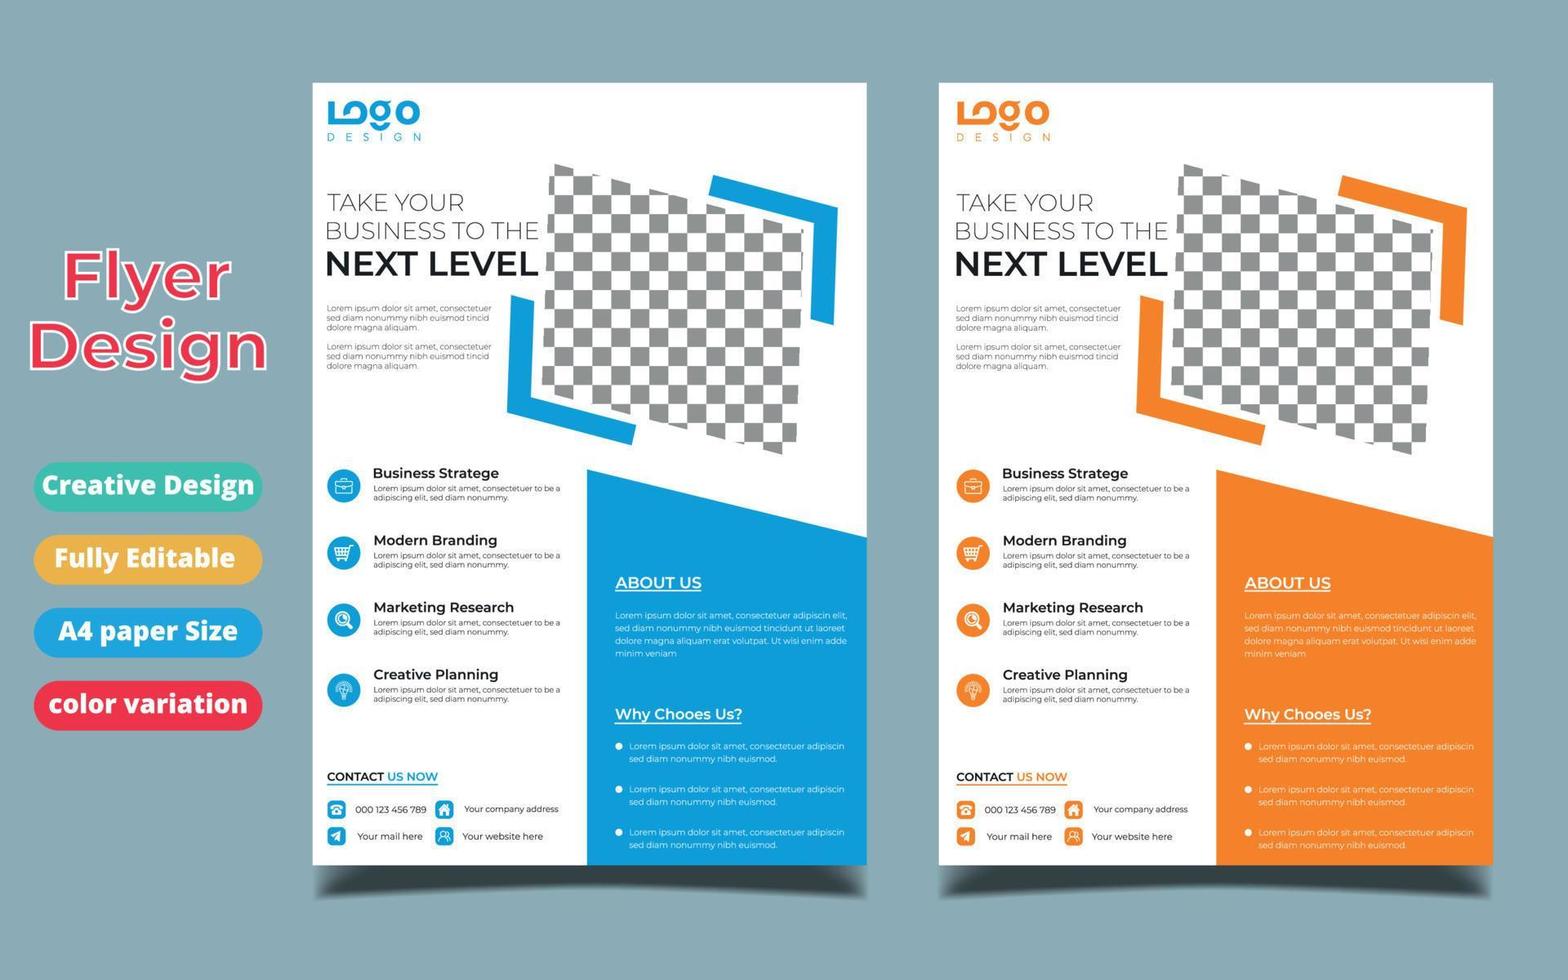 Business brochure flyer design layout template in A4 size, with blur background, vector